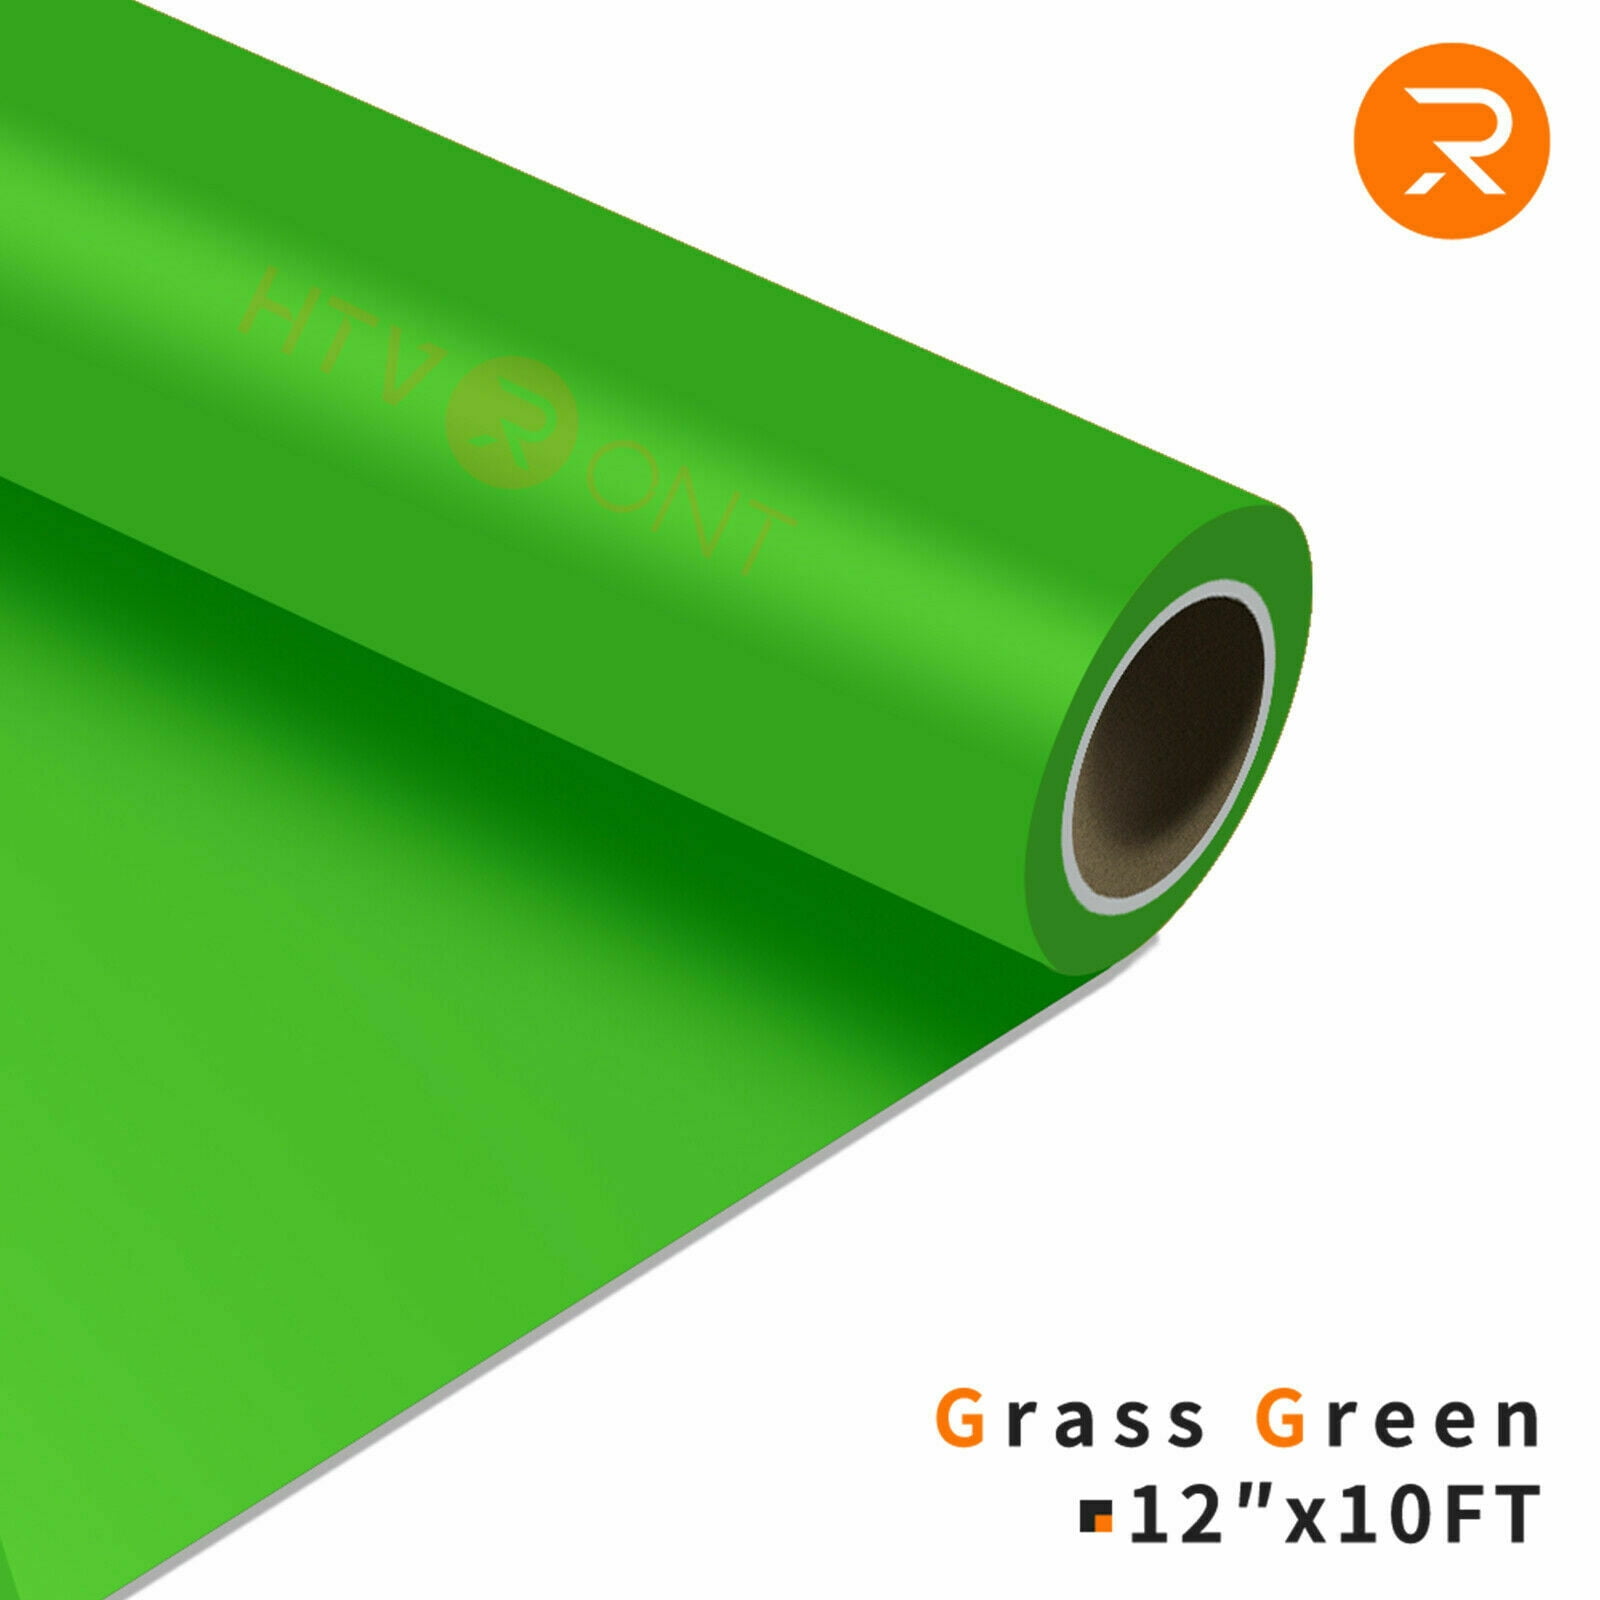 Emerald Green Heat Transfer Vinyl Rolls-12 x 10FT Iron on Vinyl for  Shirts,Emerald Green Iron on for Cricut&All Cutter Machine-Easy to Cut&Weed  for